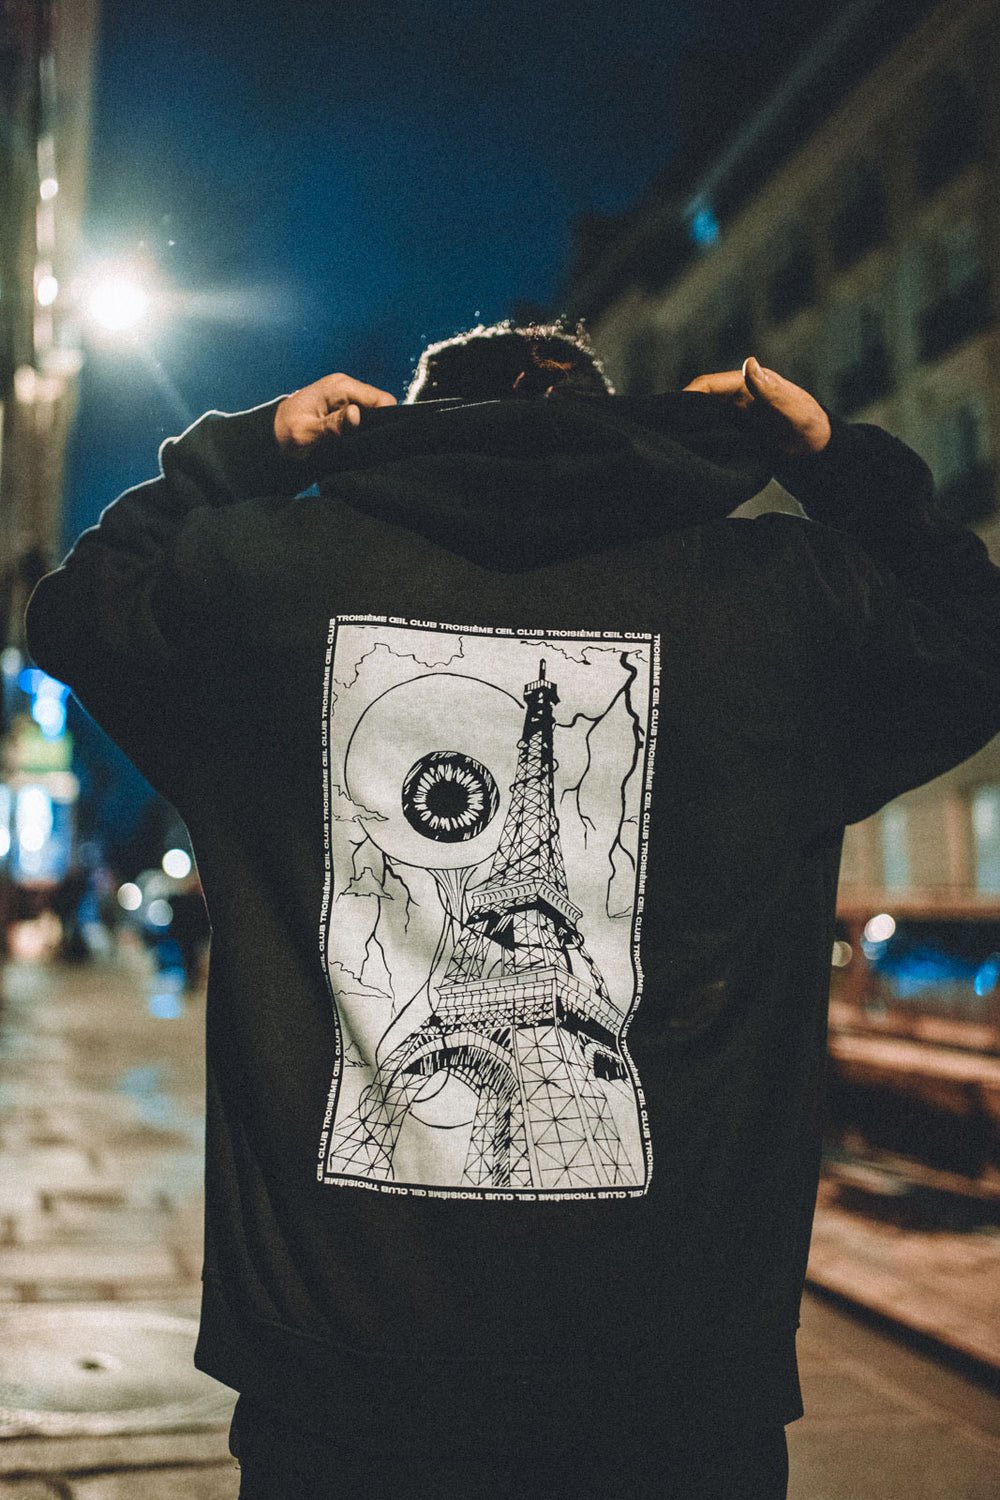 Graphic AW21 - Hoodie Noir